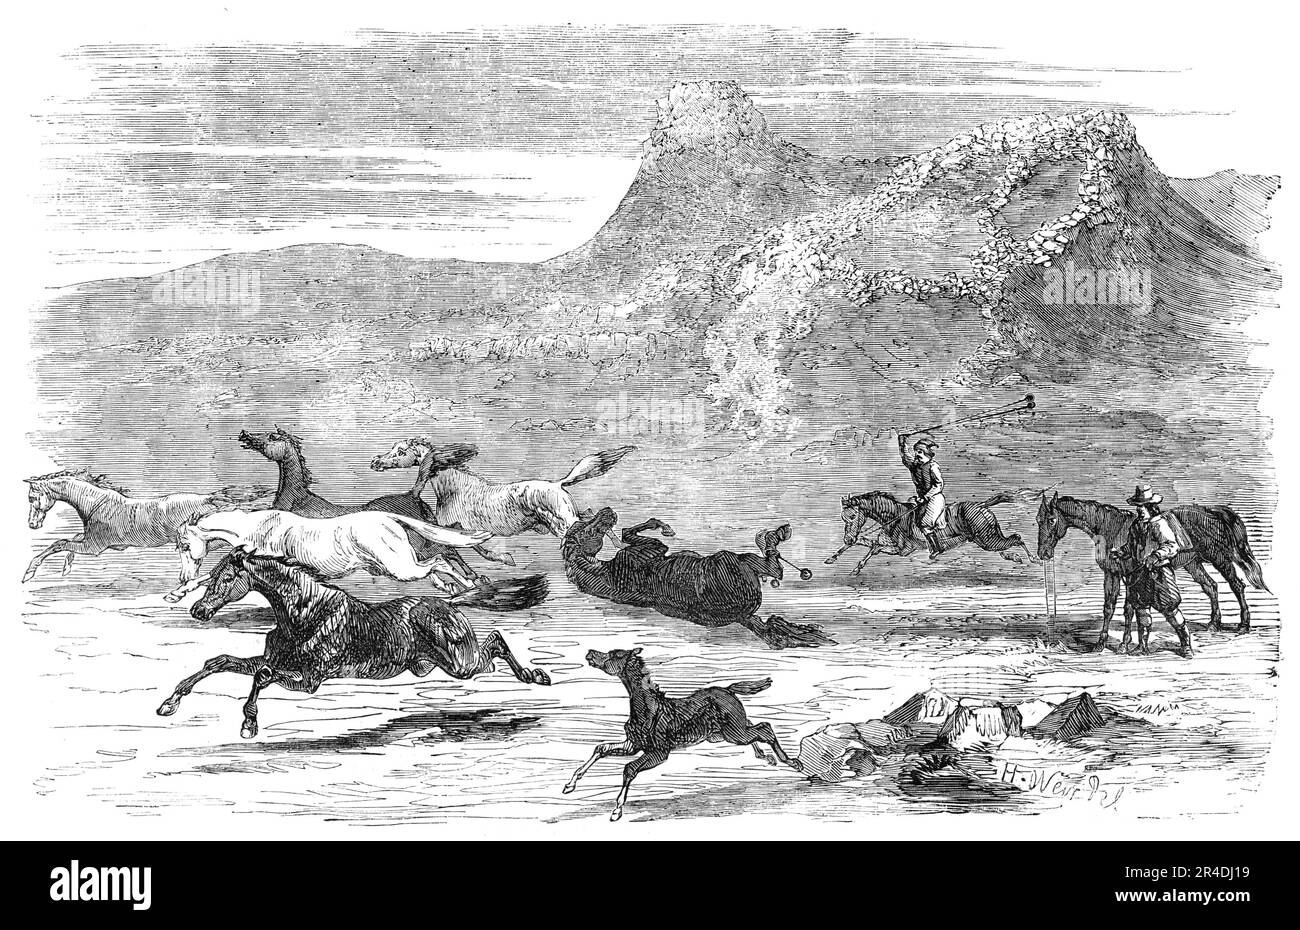 The Spanish-American Guachos [sic] catching wild horses, in the Falkland Islands, 1856. Depiction of '...the mode in which the wild horses are caught in the Falkland Islands by the Spanish-American Gauchos, who are chiefly employed in cattle-farming operations. Taking in his hand two or three stone or lead balls, attached each to the end of a strong cord, the other ends of which are fastened together, the Gaucho gives chase on horseback to the wild animals, swinging the balls round his head in a circle, and, when near enough, he throws them at the hind legs of the horse he selects. The balls, Stock Photo